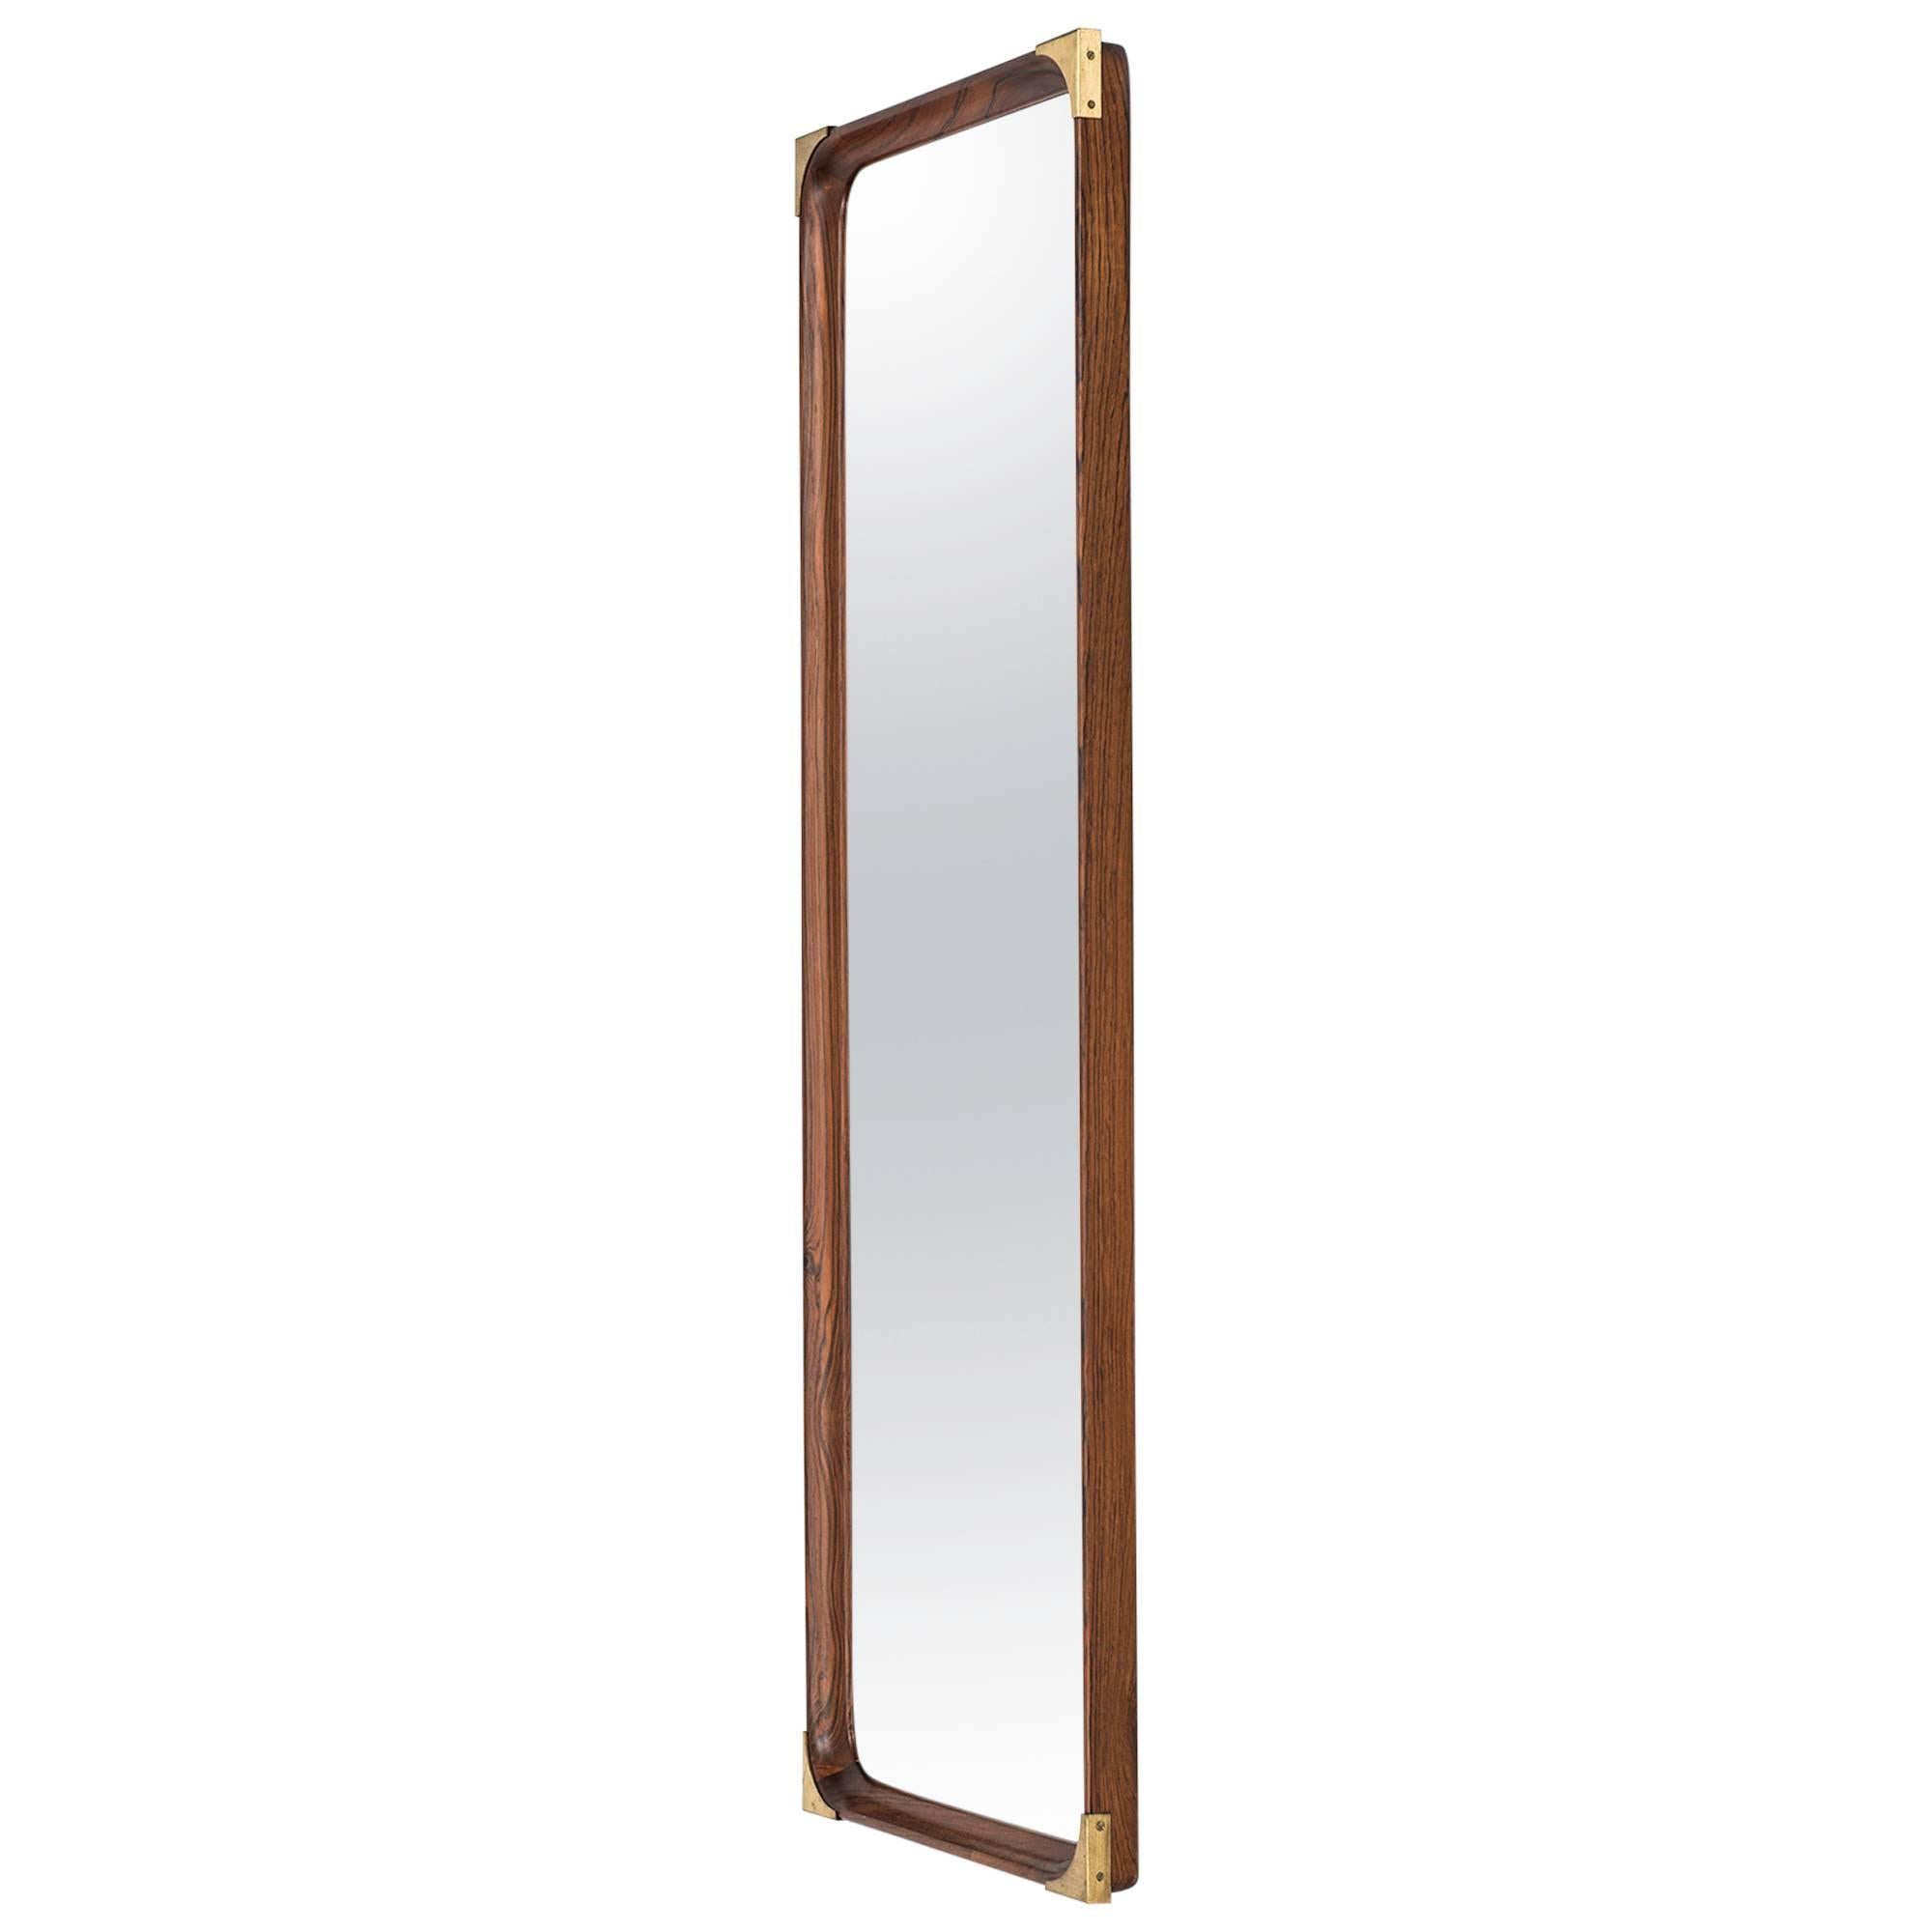 Rosewood Mirror with Brass Details Produced in Sweden